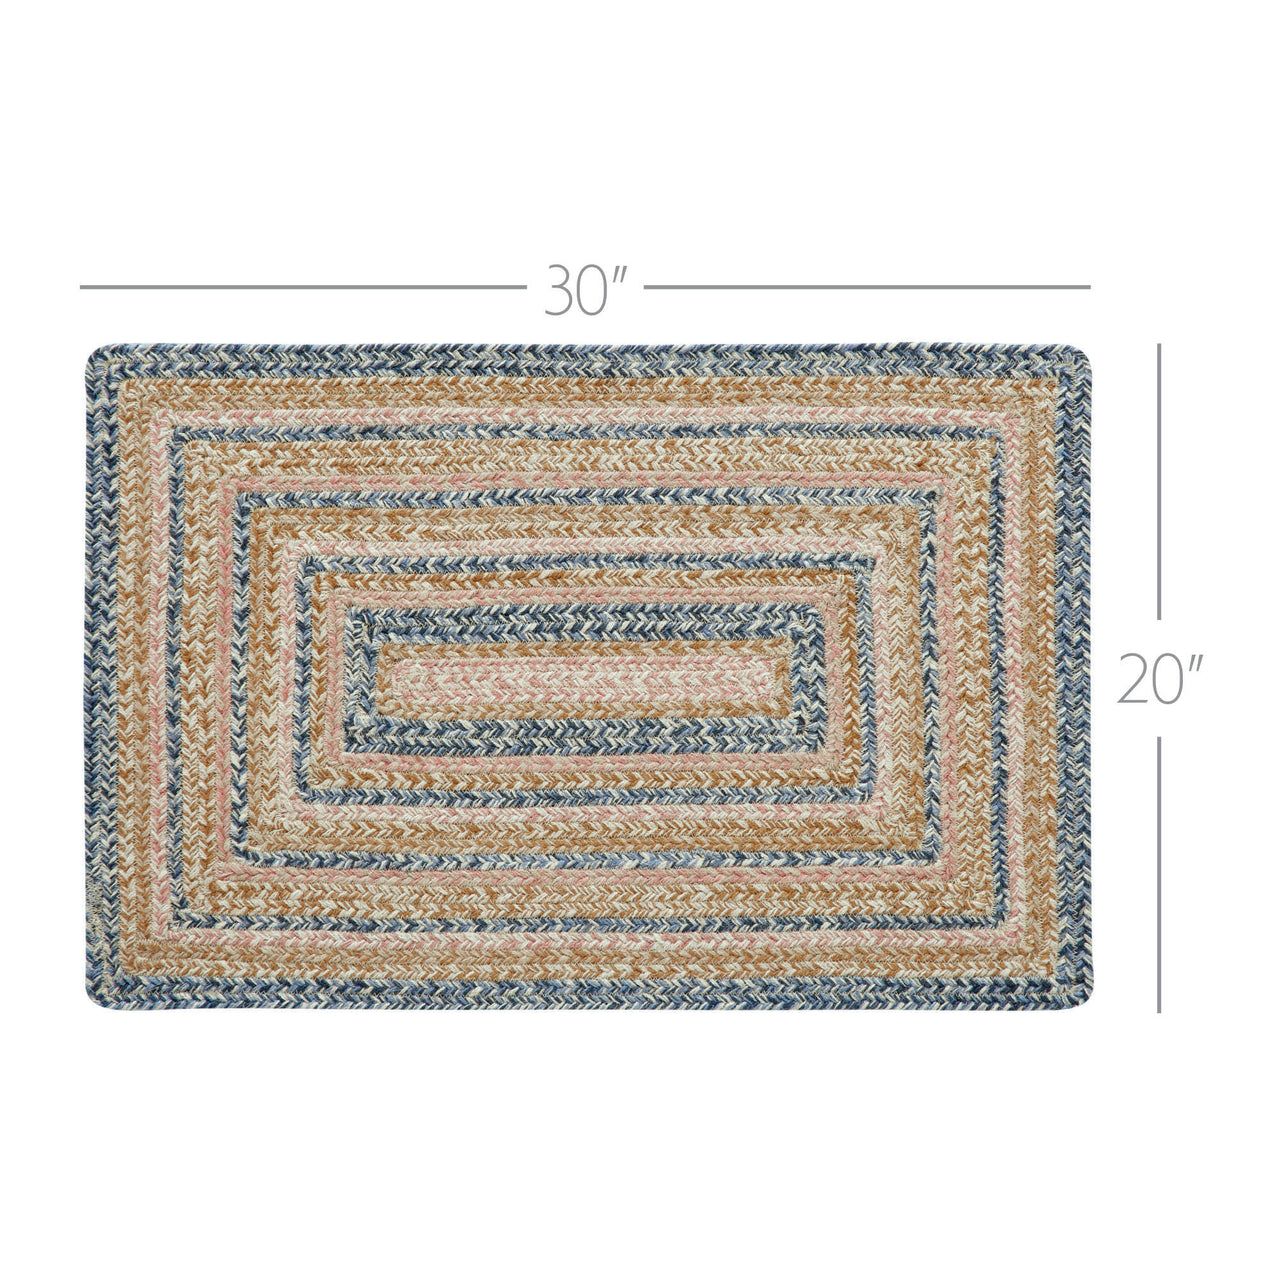 Kaila Jute Braided Rug Rect. with Rug Pad 20"x30" VHC Brands